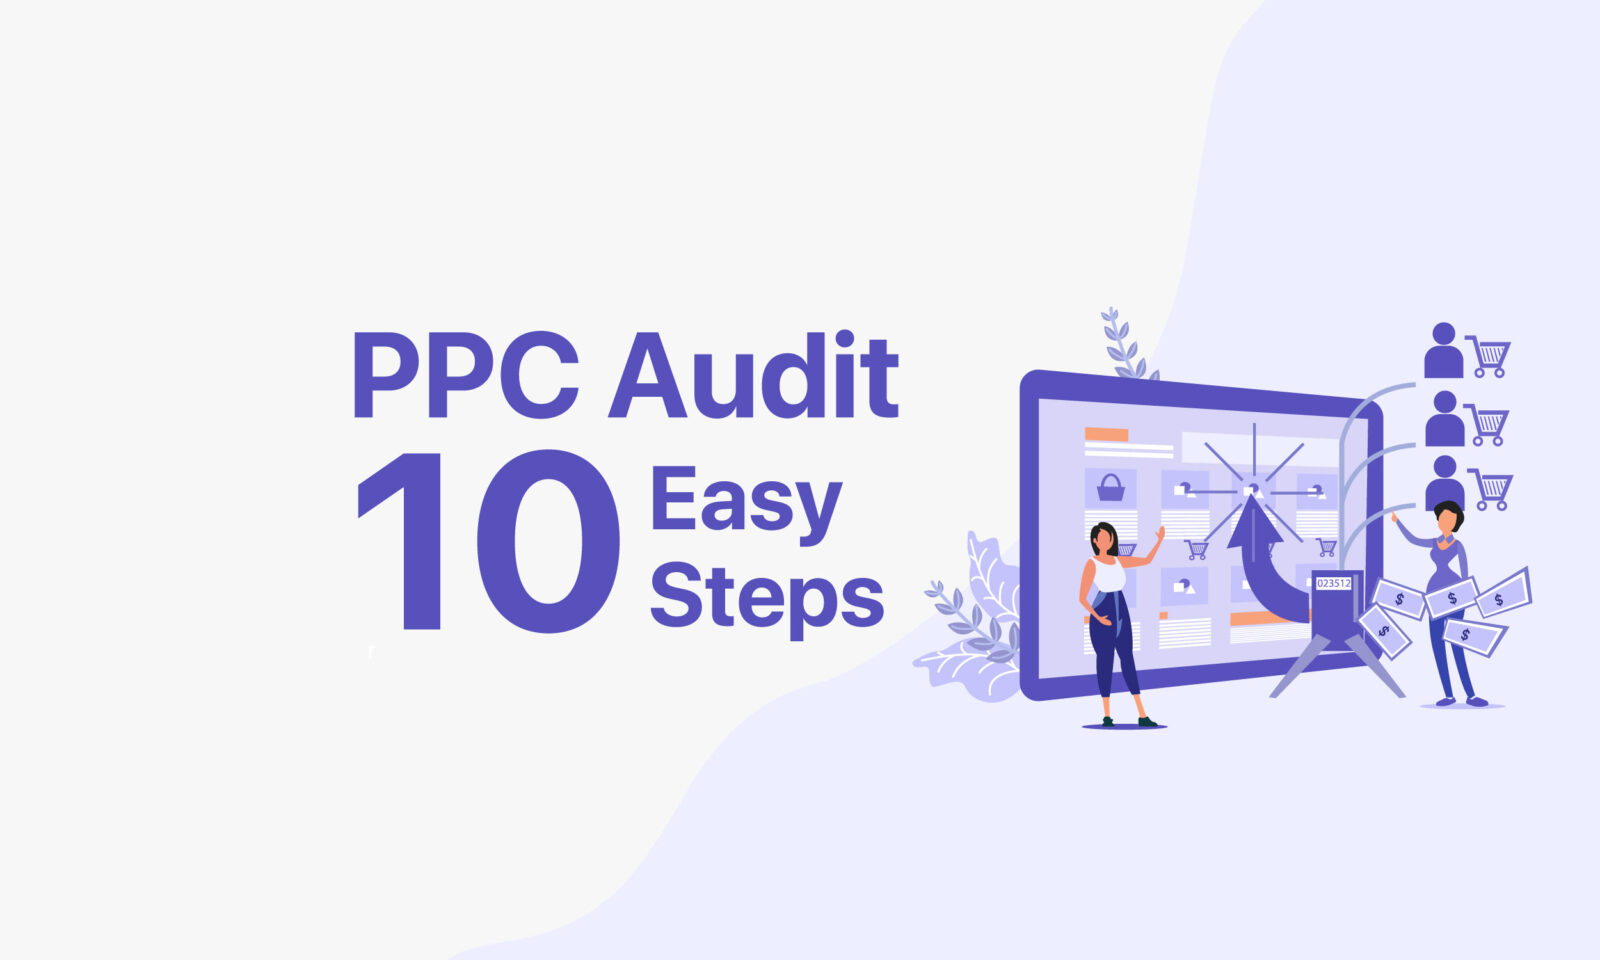 How to Conduct Your PPC Audit in 10 Easy Steps